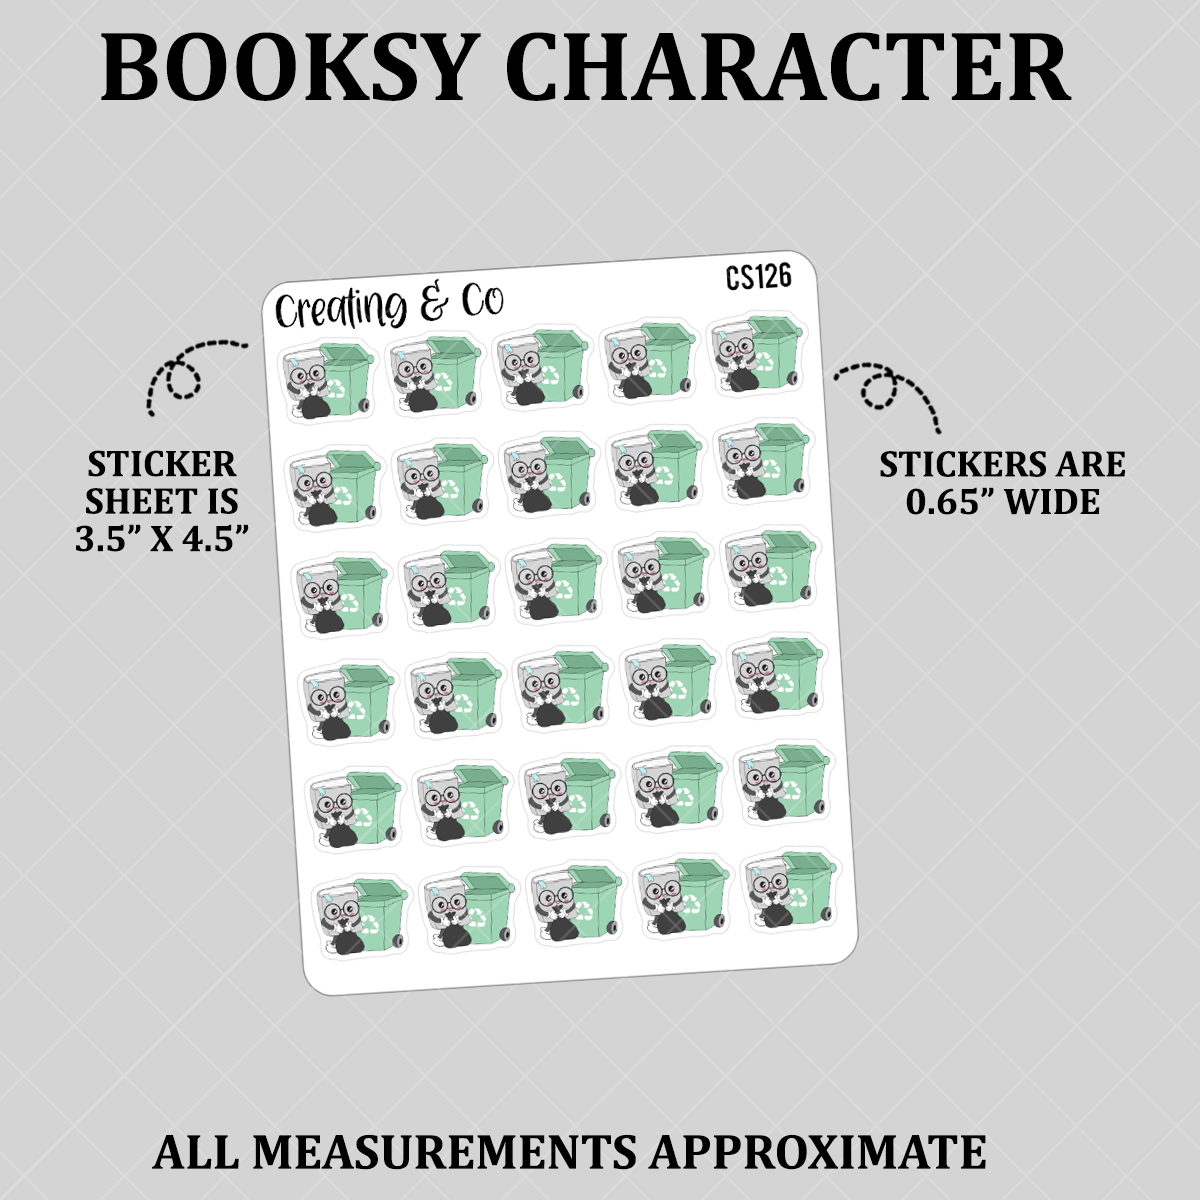 Trash Day, Recycle Booksy Character Functional Stickers - CS126